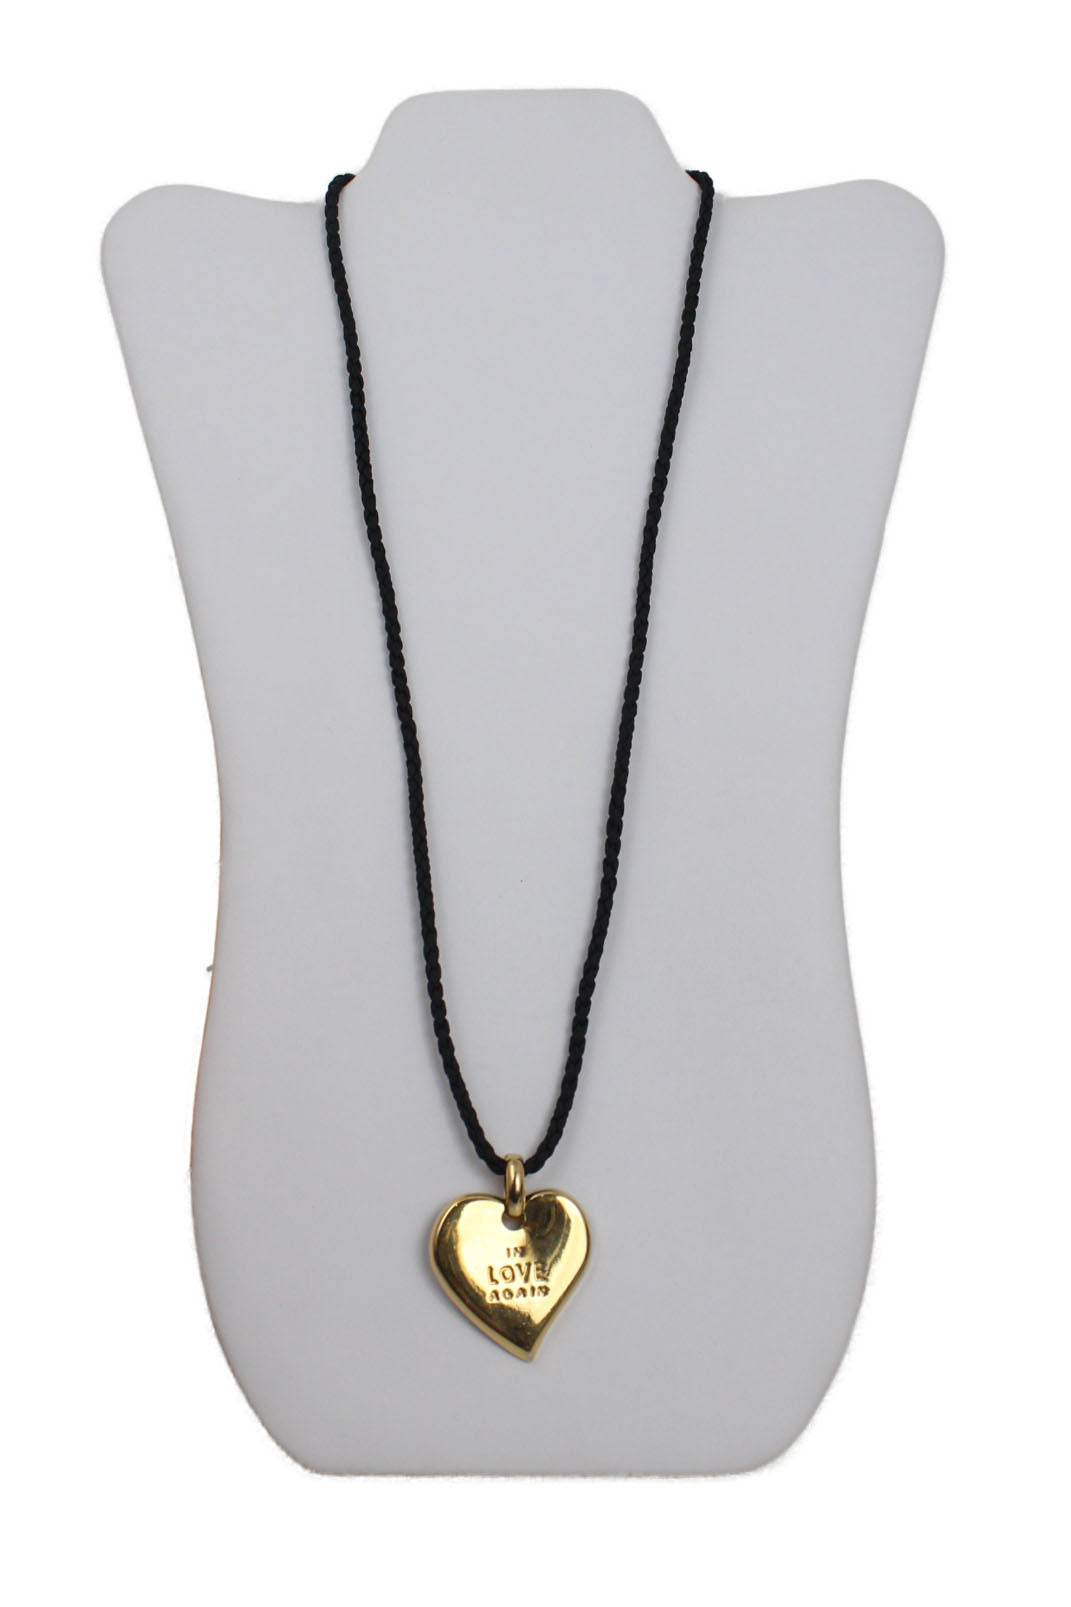 description: vintage yves saint laurent in love again gold-tone necklace pendant. features heart-shaped pendant with "in love again" embossed, black cord, lock closure at back, and signed at back. 